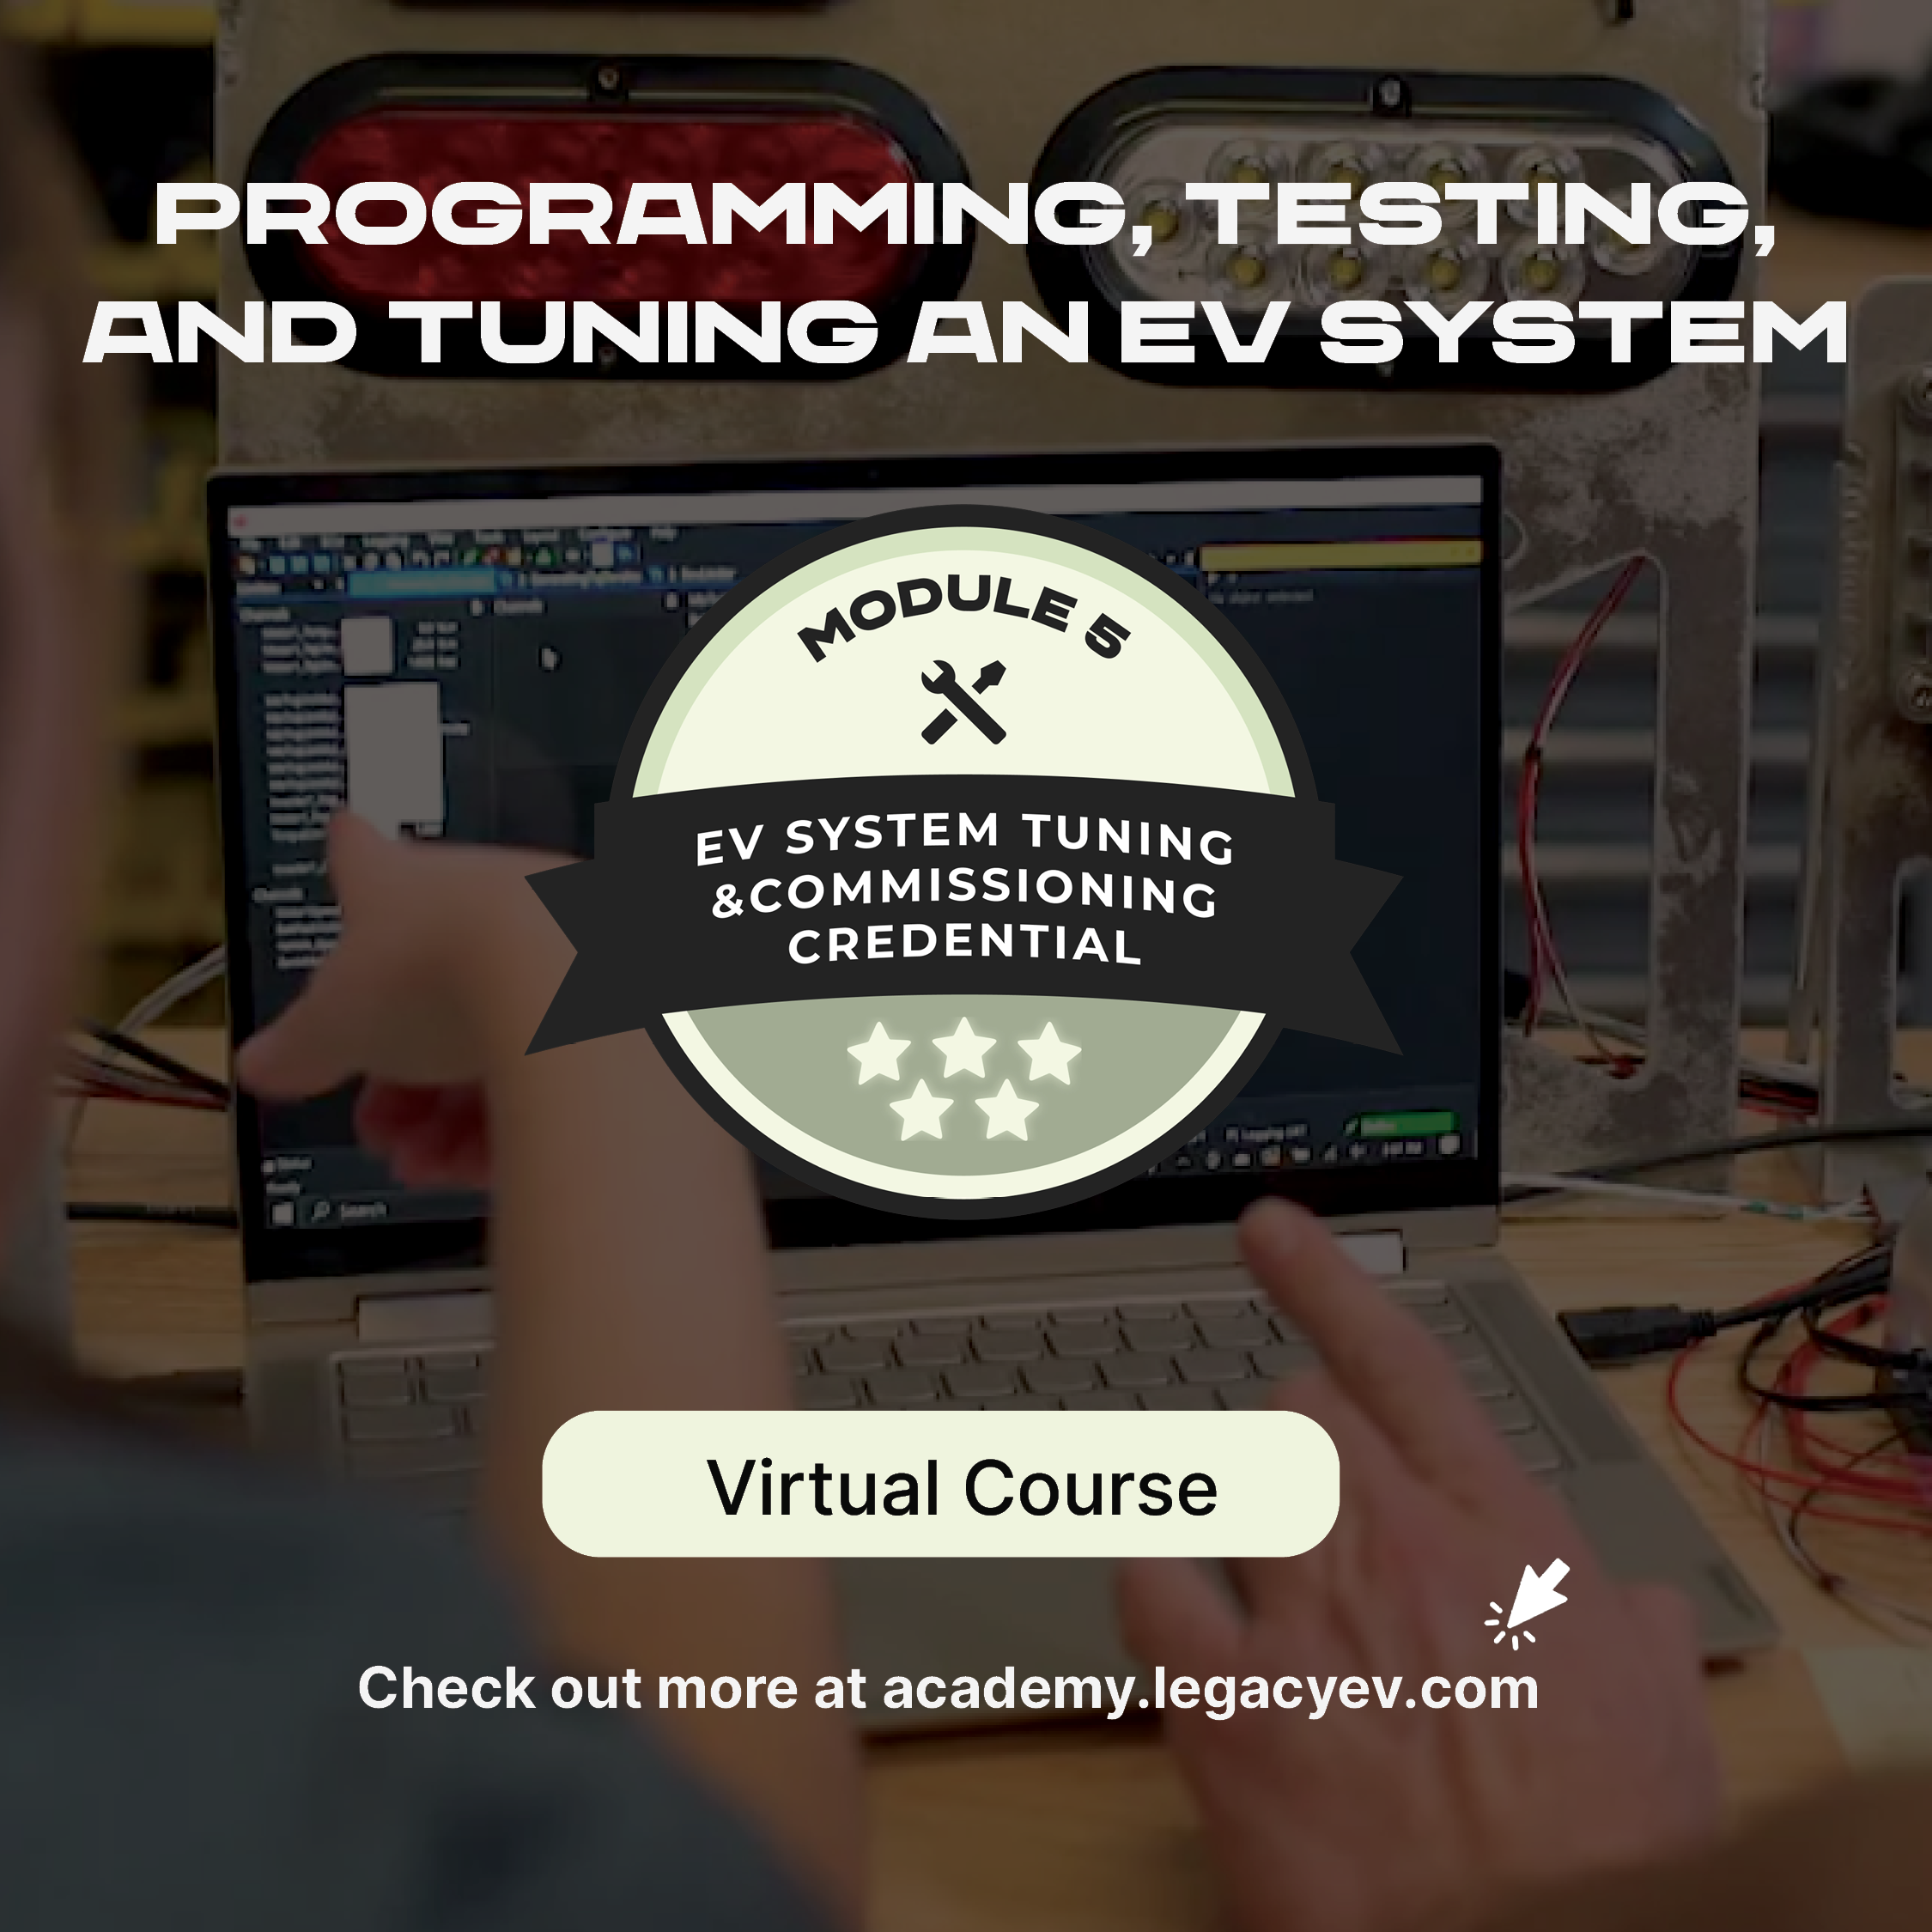 Programming, Testing, and Tuning an EV System Virtual Course